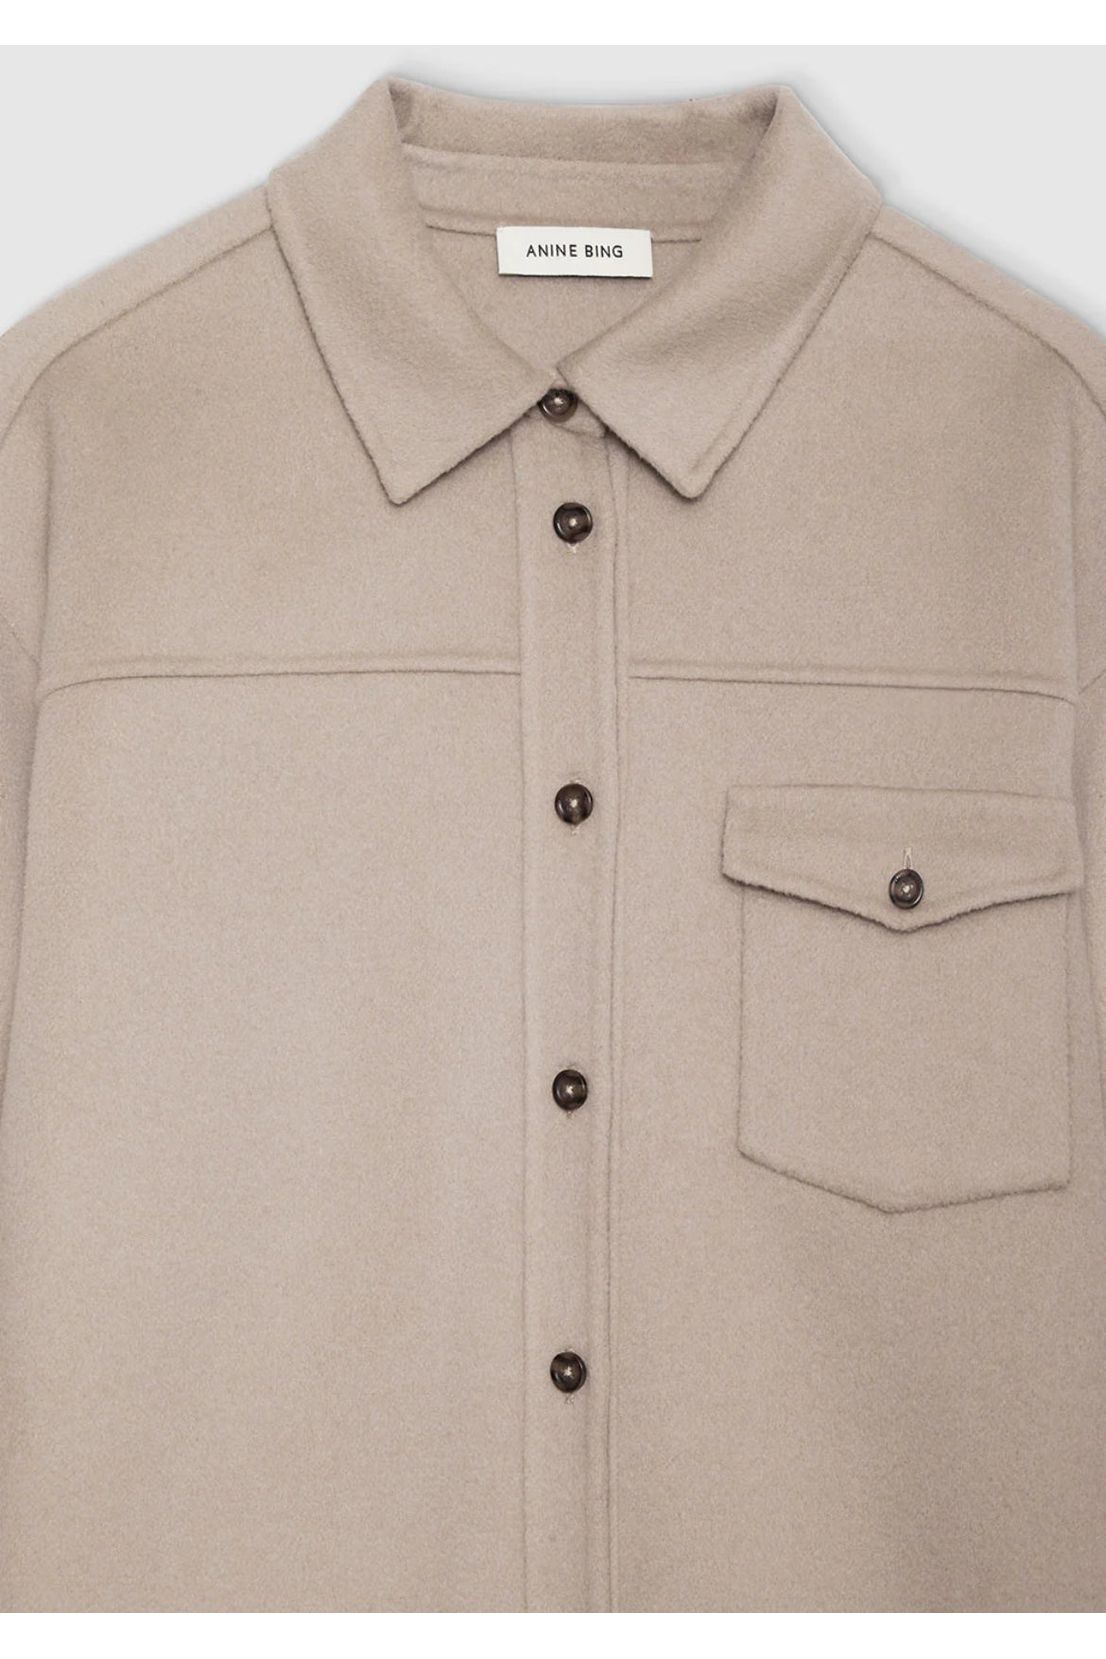 Sloan Shirt in Taupe Cashmere Blend by Anine Bing